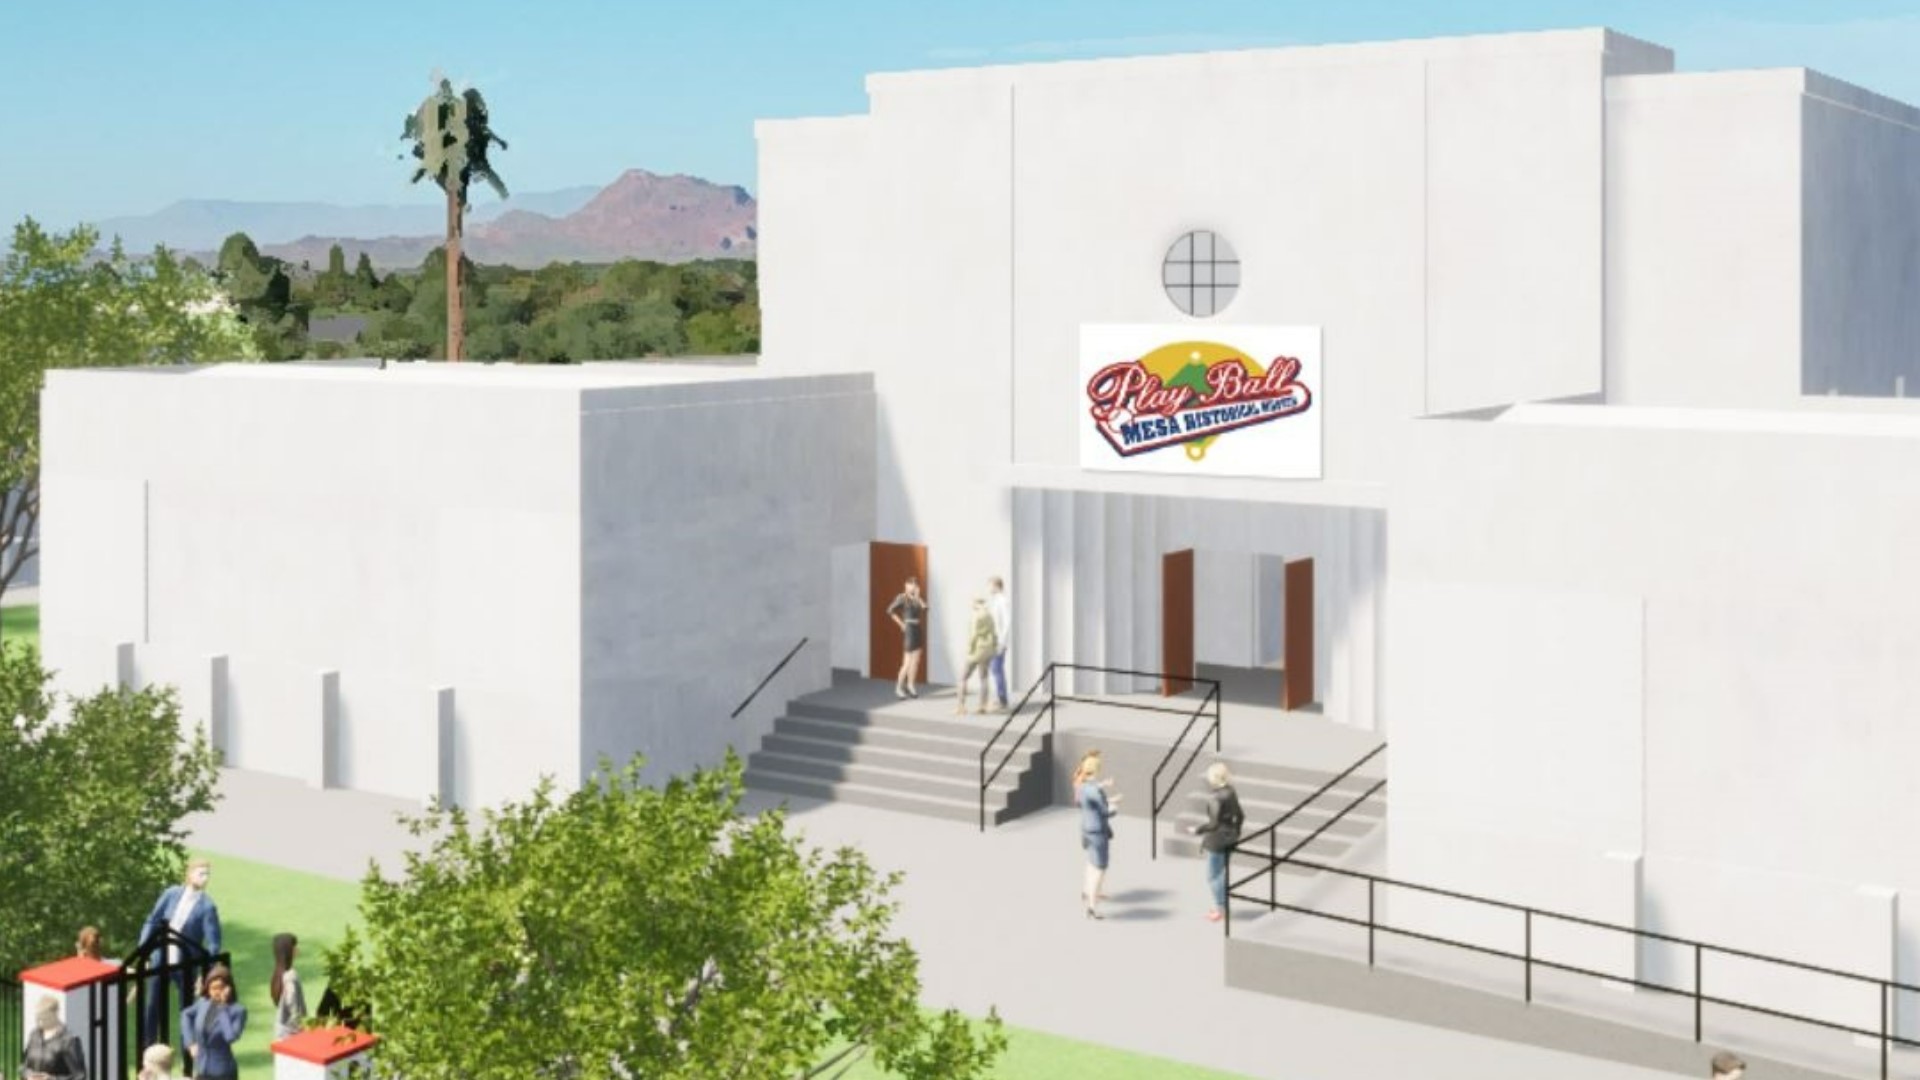 "We are asking people to step up to the plate and help us make this baseball museum come true," Susan Rucci, executive director of the Mesa Historical Museum said.